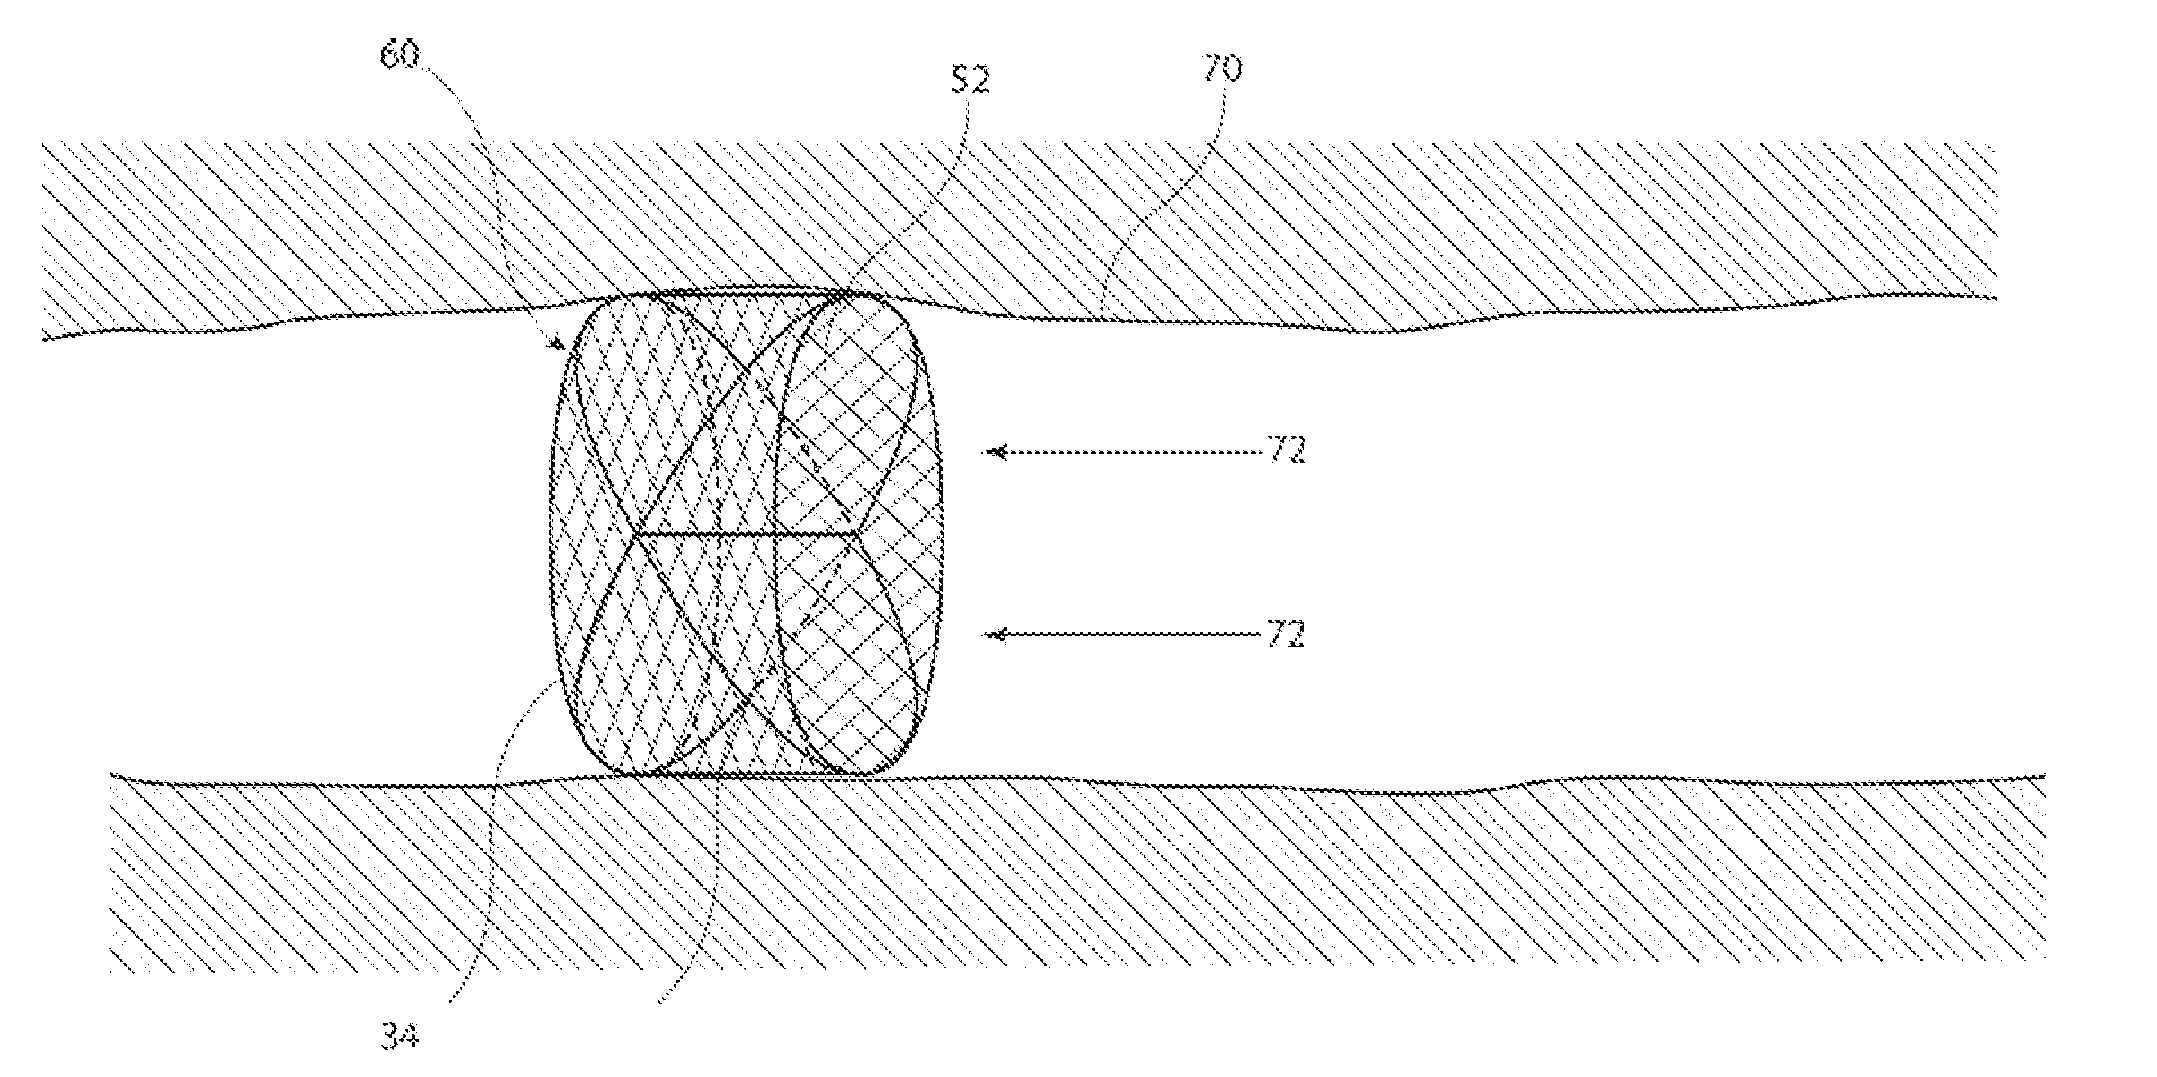 Vascular occluder with crossing frame elements